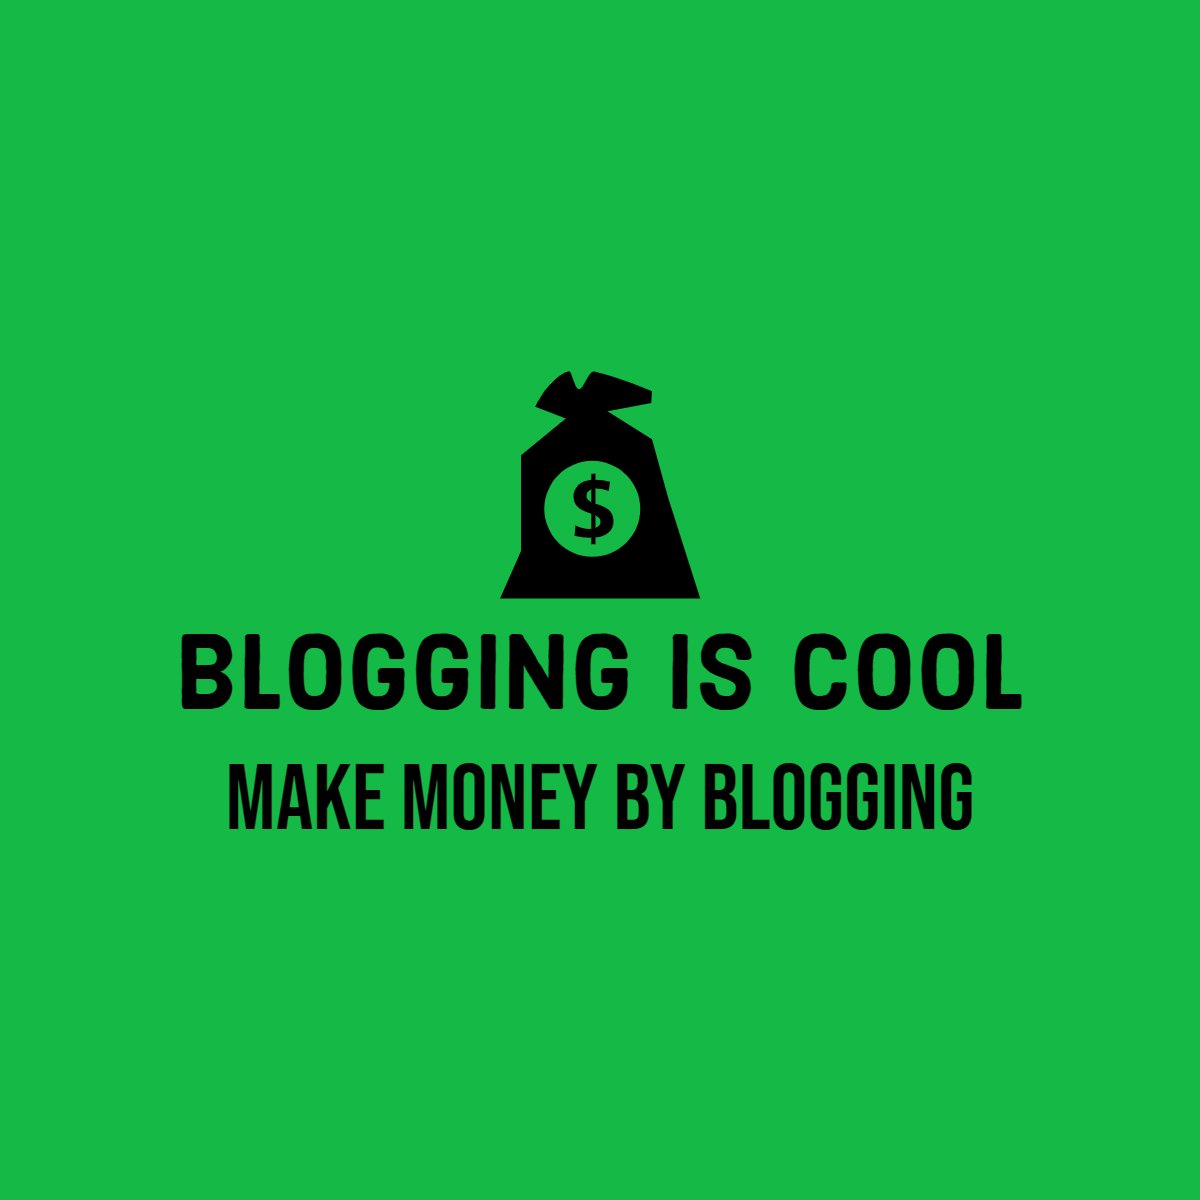 bloggingiscool.com Are you looking for a way to earn passive income?